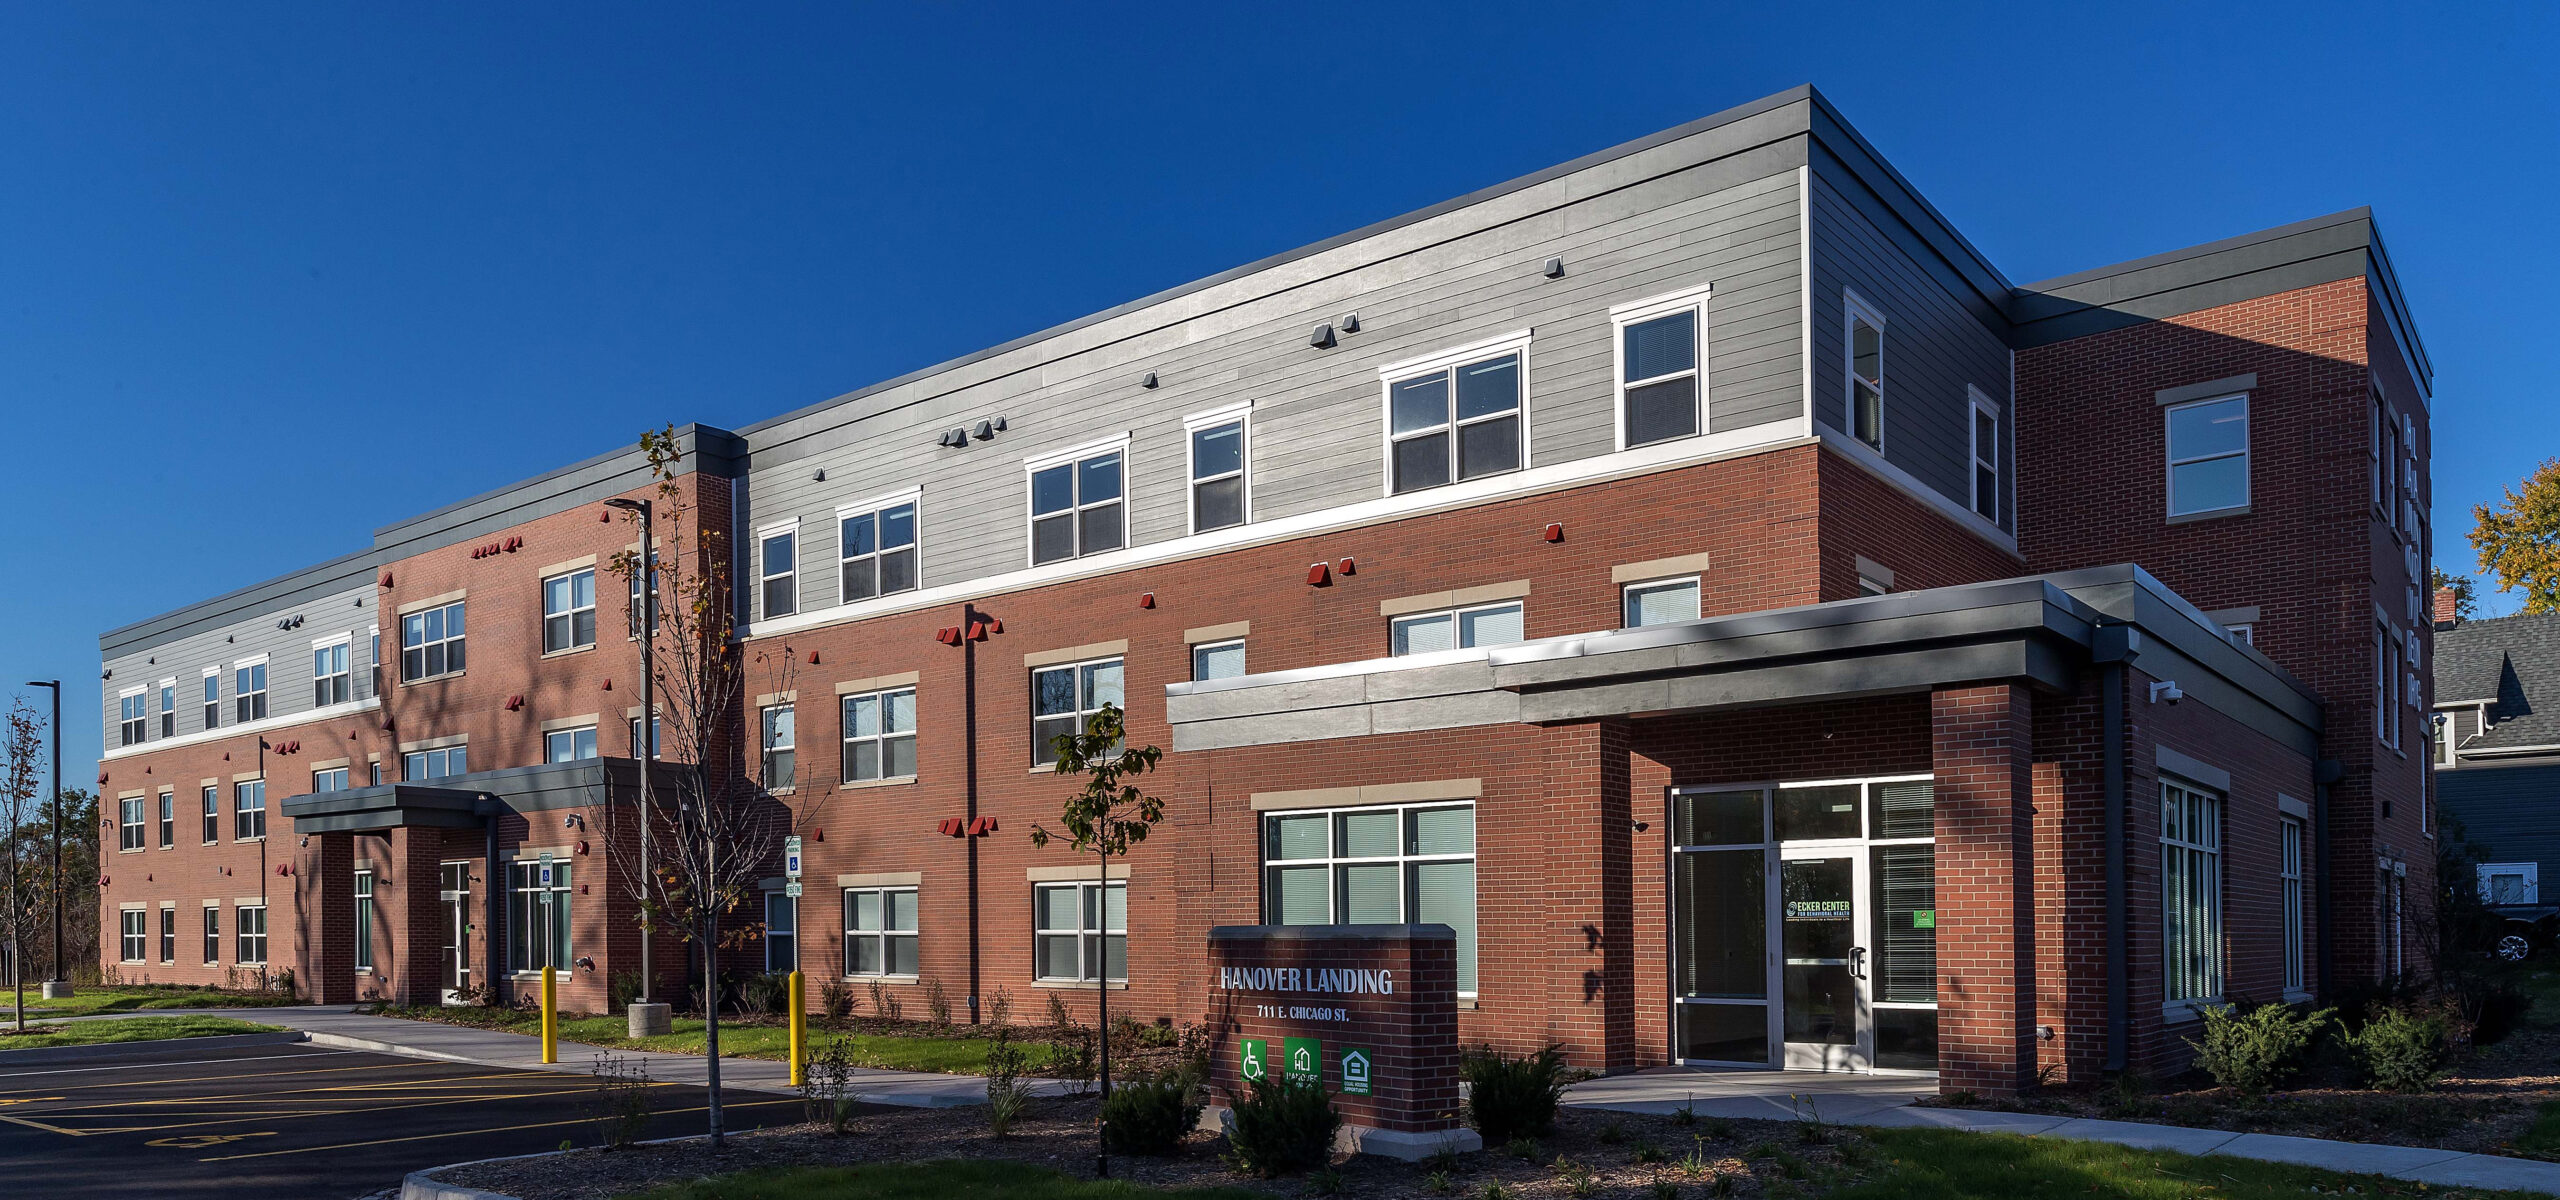 McShane Completes 40-unit Supportive Housing Residence in Elgin, Illinois